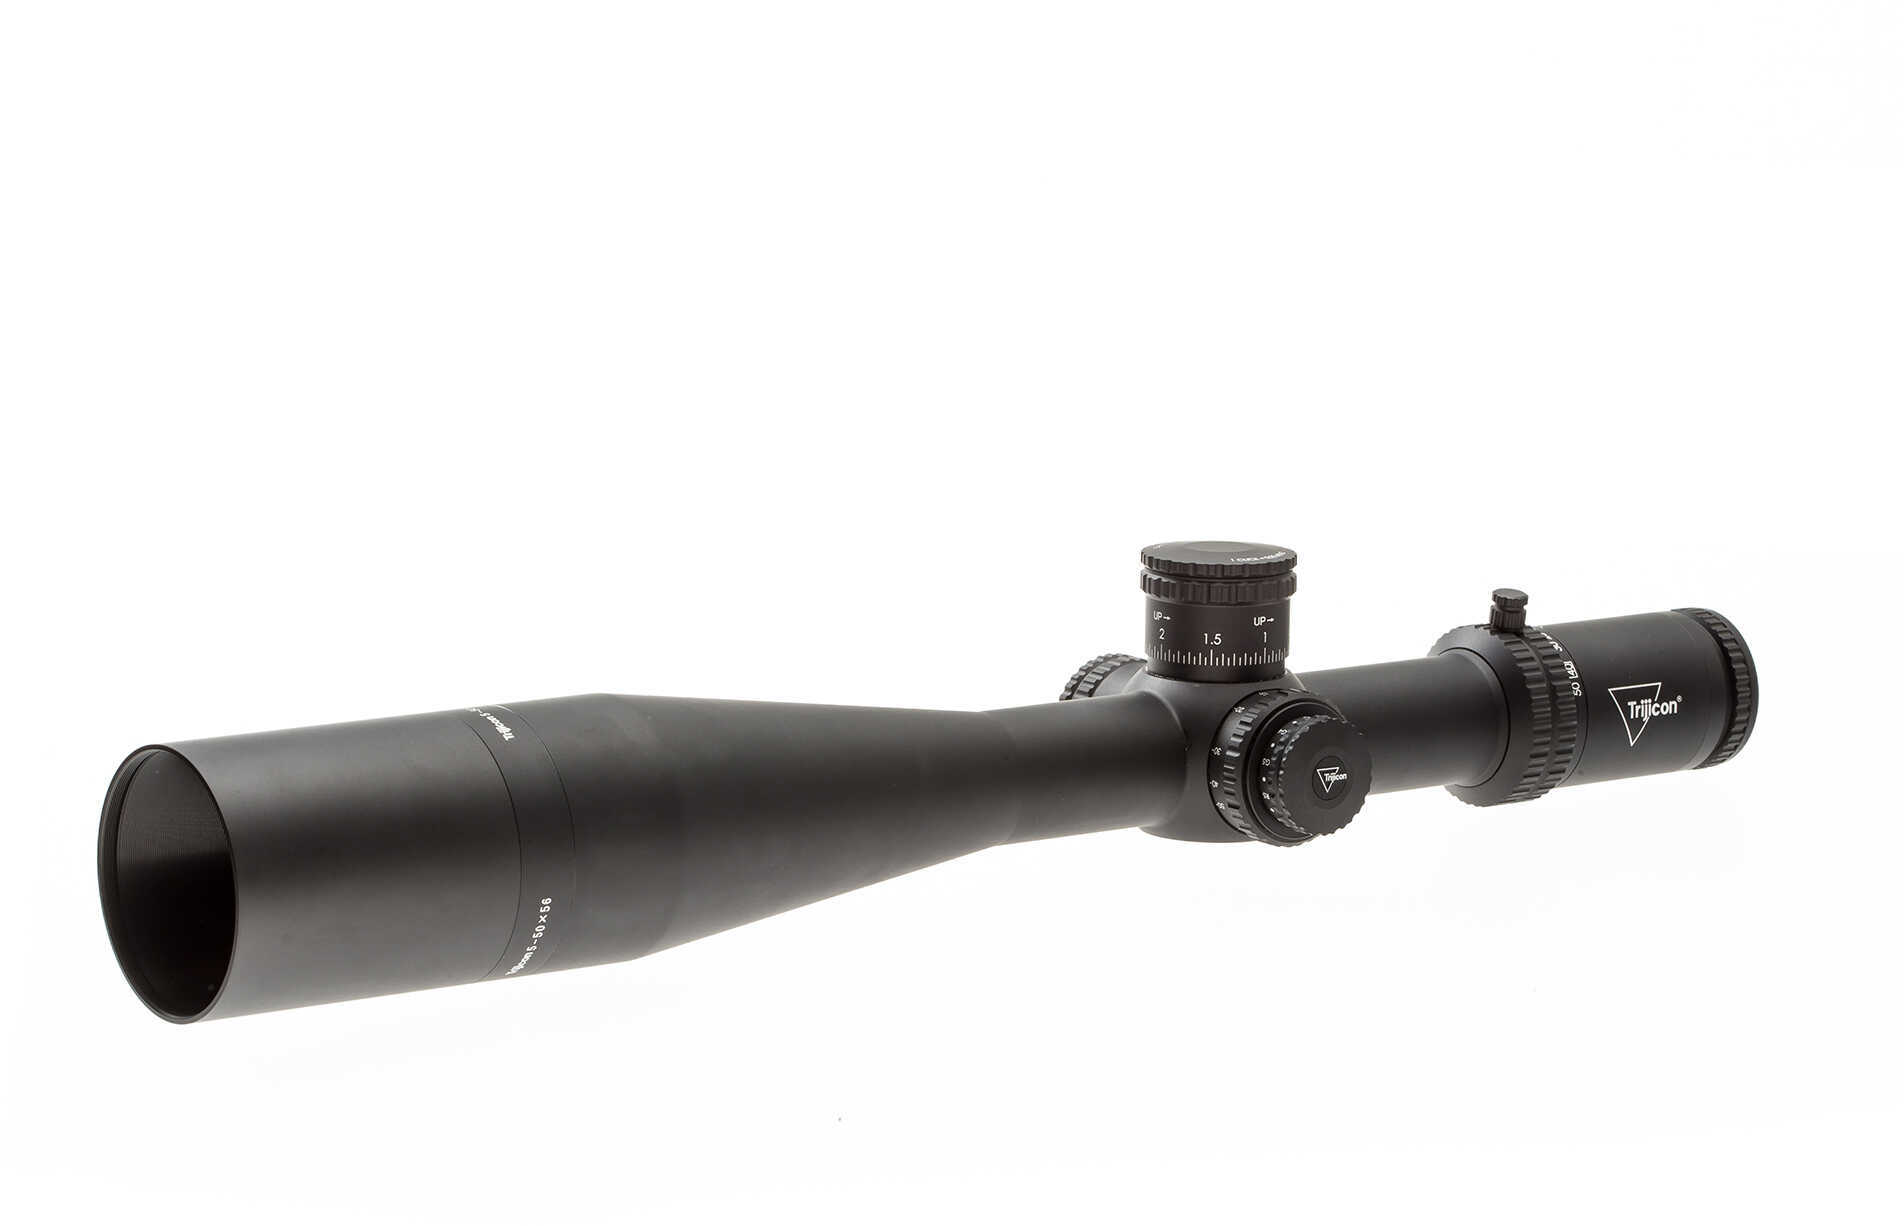 Trijicon AccuPower 5-50x56 Extreme Long Range Riflescope with Red/Green MRAD Dot Crosshair Reticle, 34mm tube